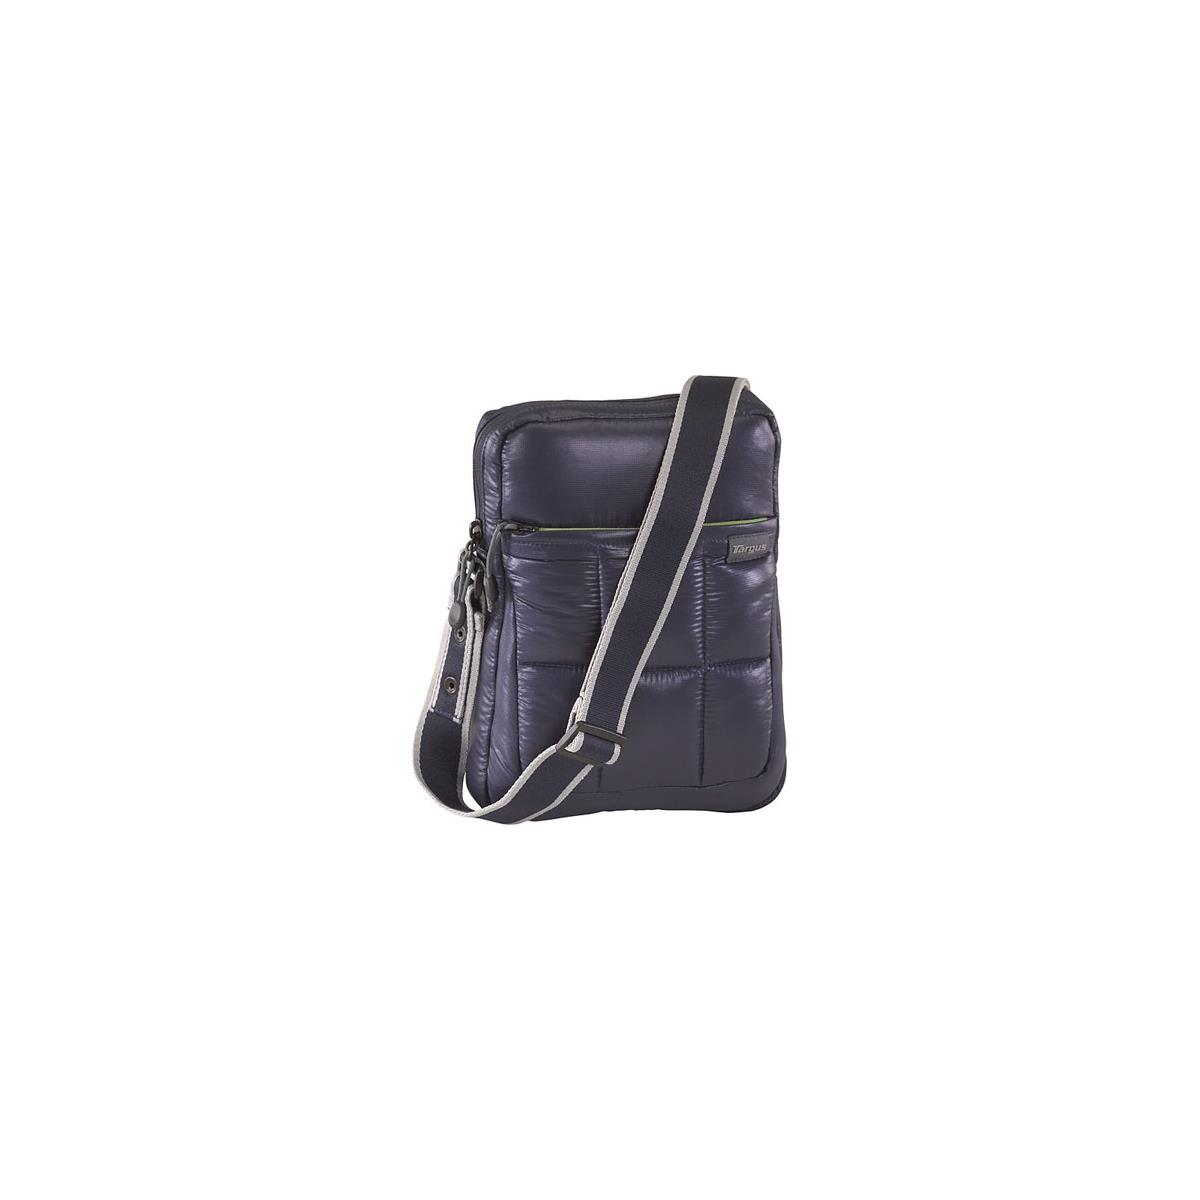 Image of Targus TSS112US 10.2 inch Crave Netbook Sleeve